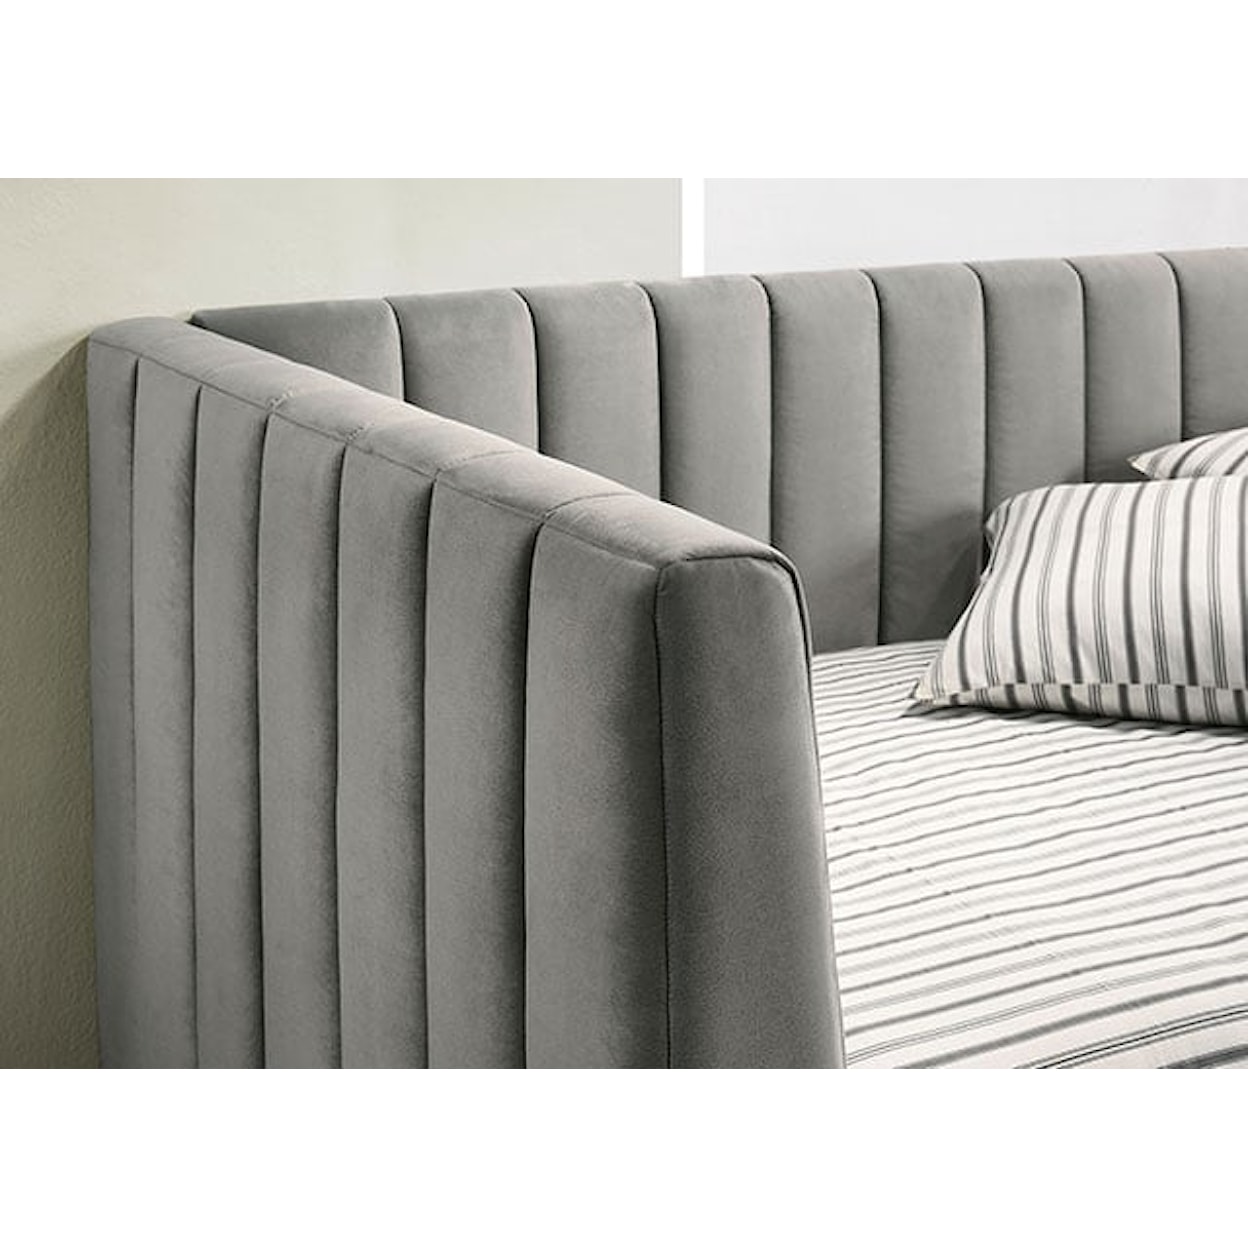 Furniture of America Neoma Twin Daybed